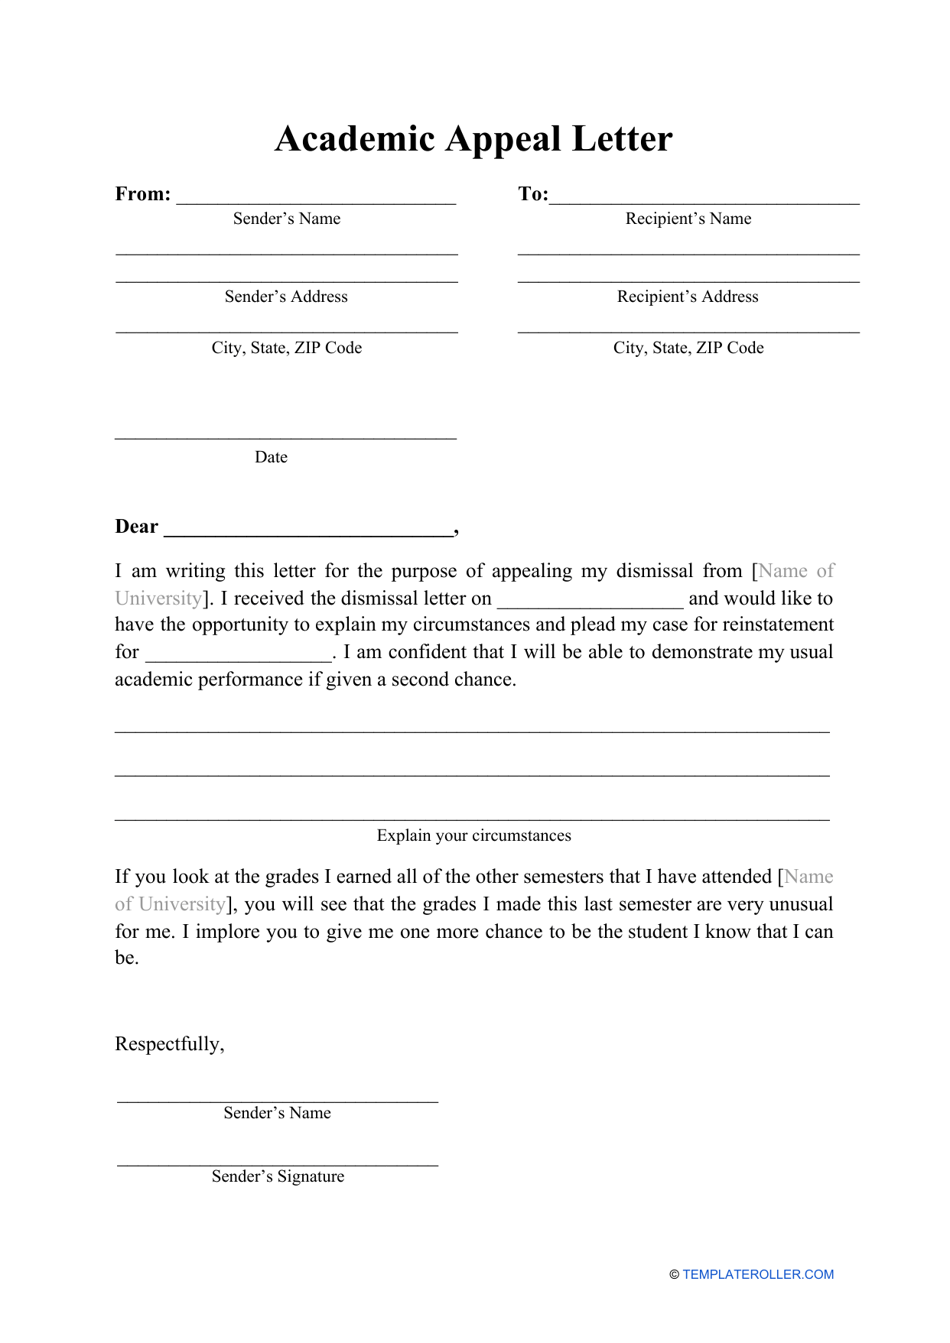 Academic Appeal Letter Template Download Printable PDF Templateroller